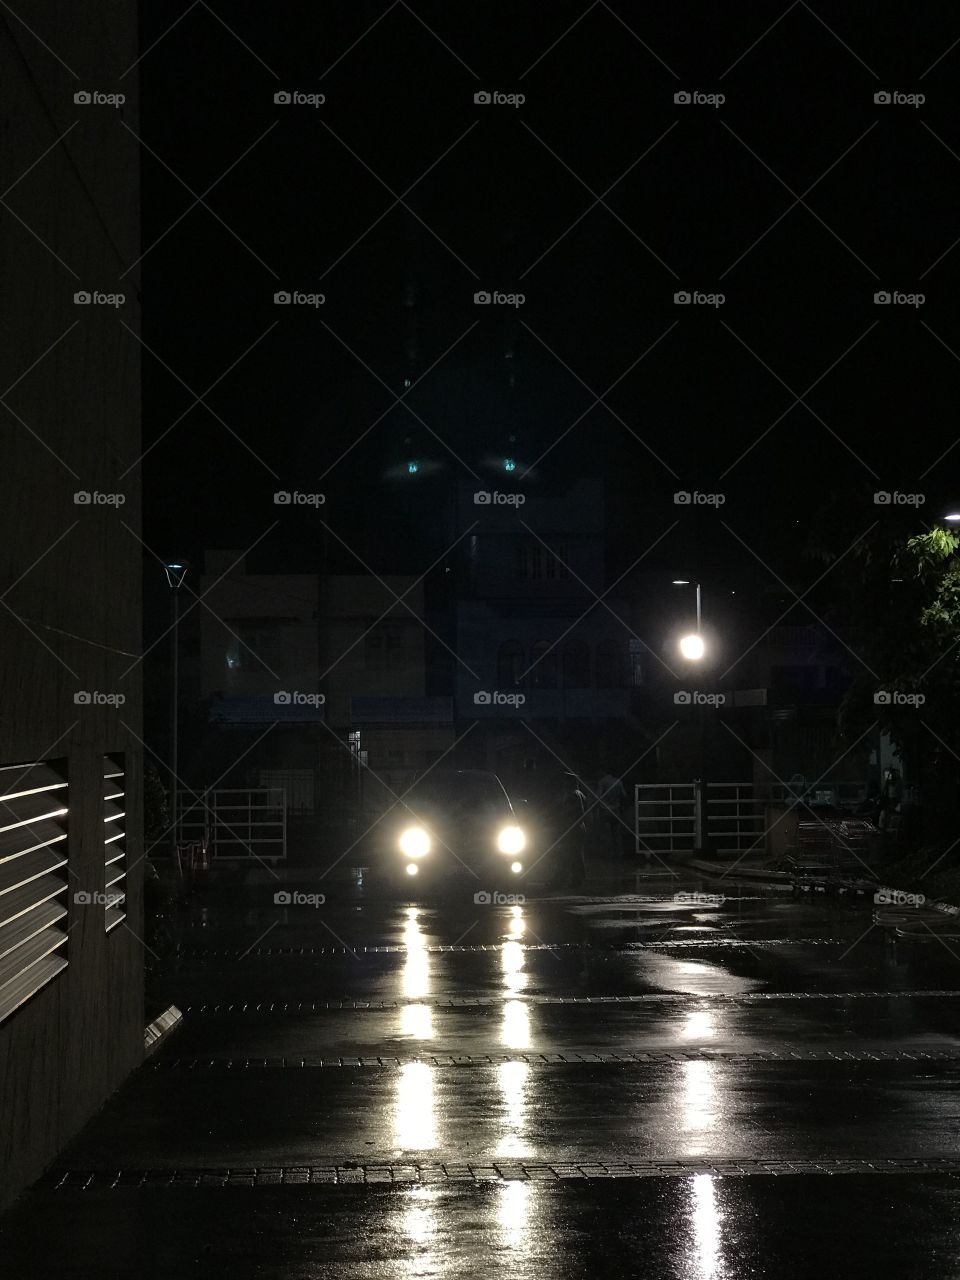 Captured a perfect shot with this car light after a rain. RainEffects.